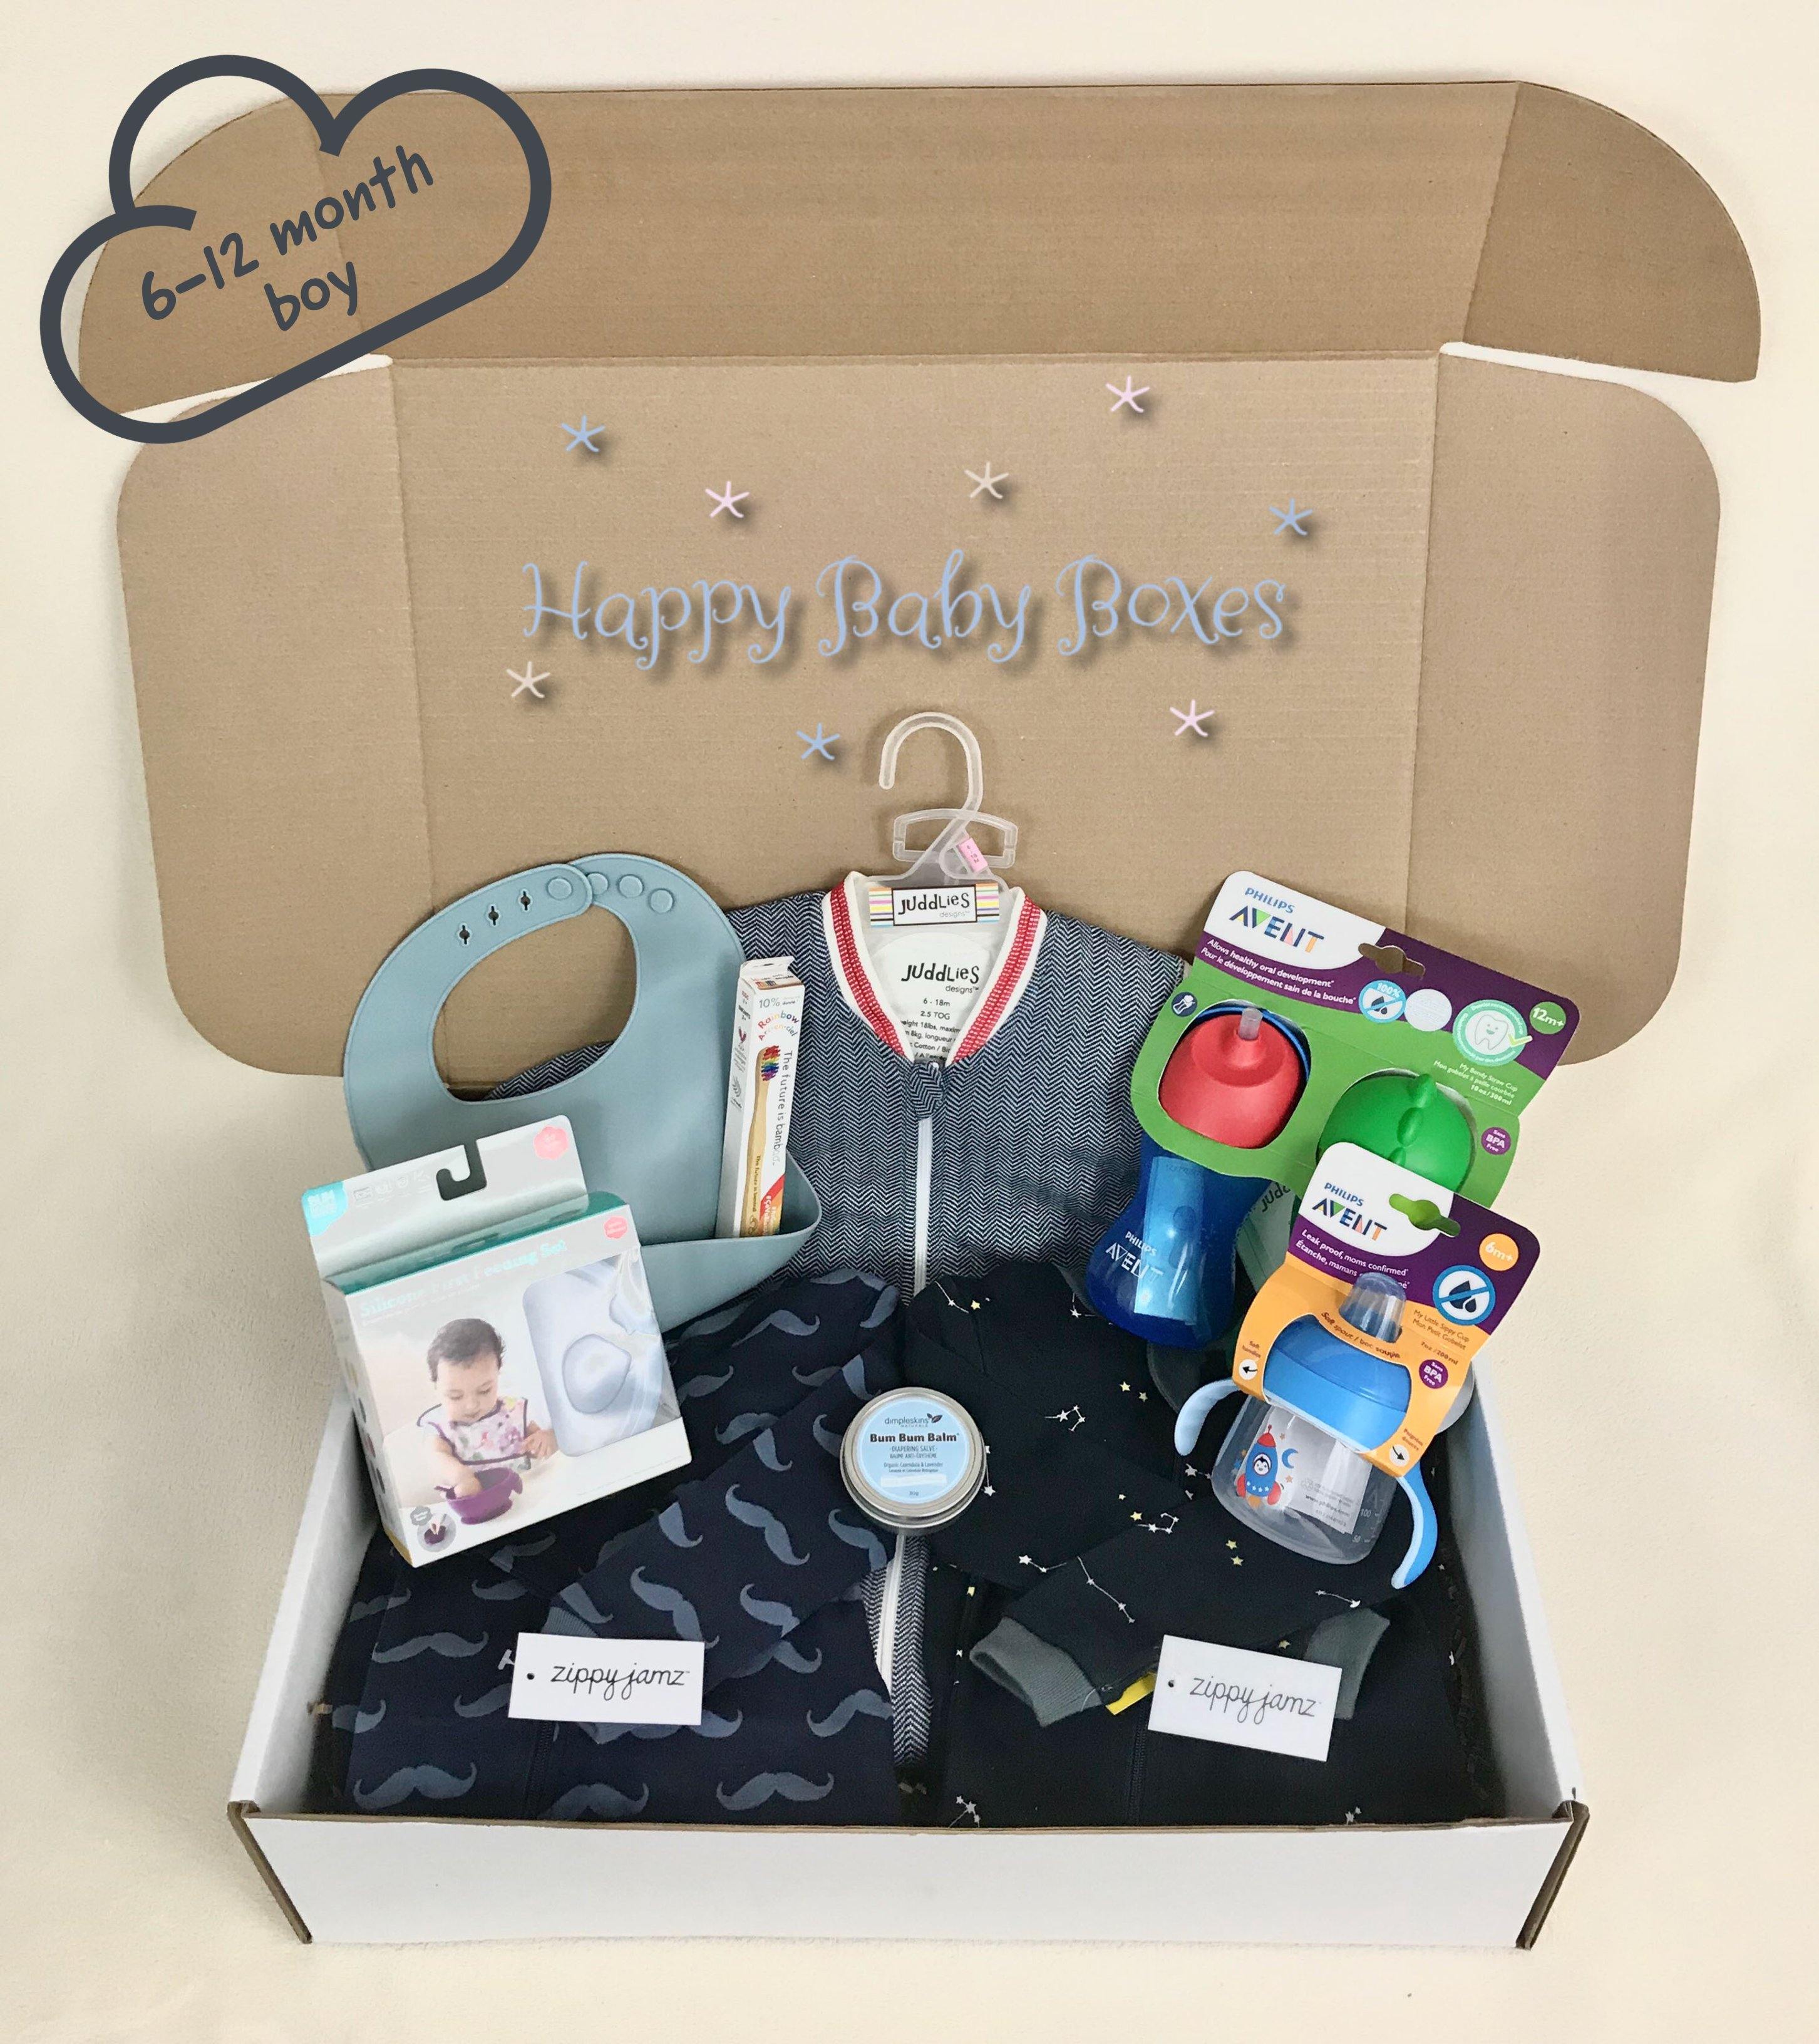 Ultimate 6-12 Month Baby Box - Happy Baby Boxes